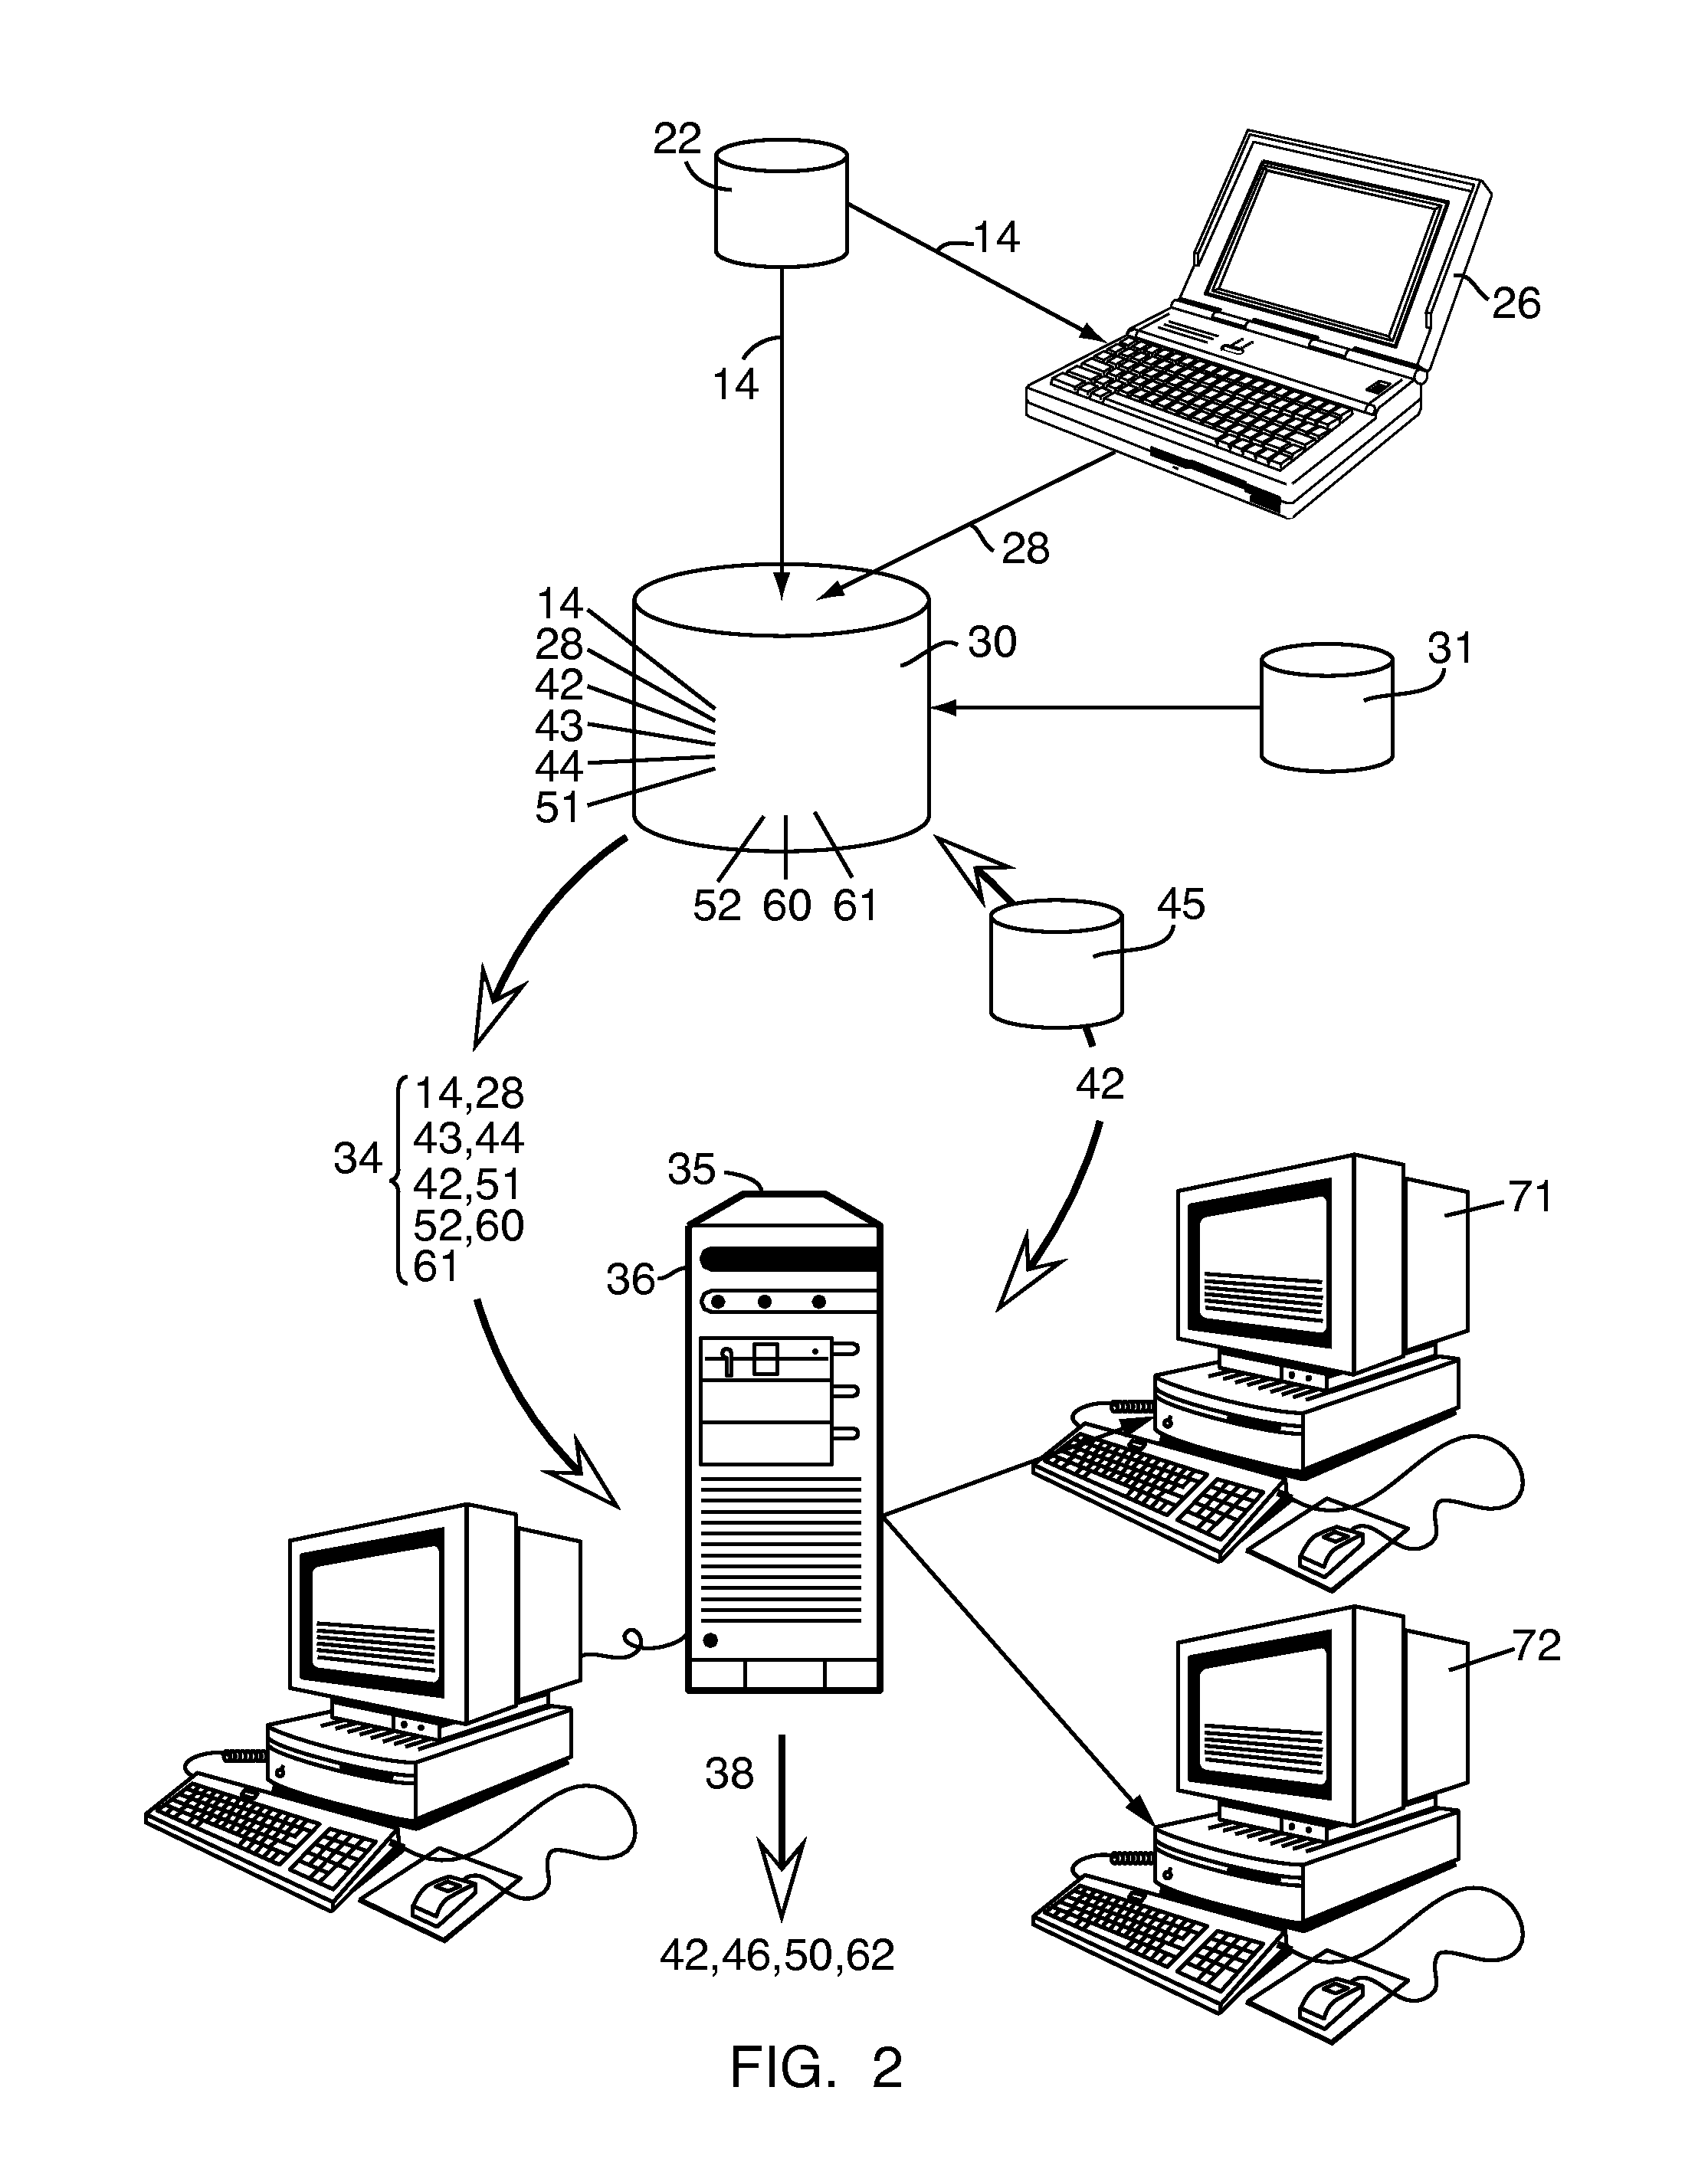 System and method for detecting potential property insurance fraud